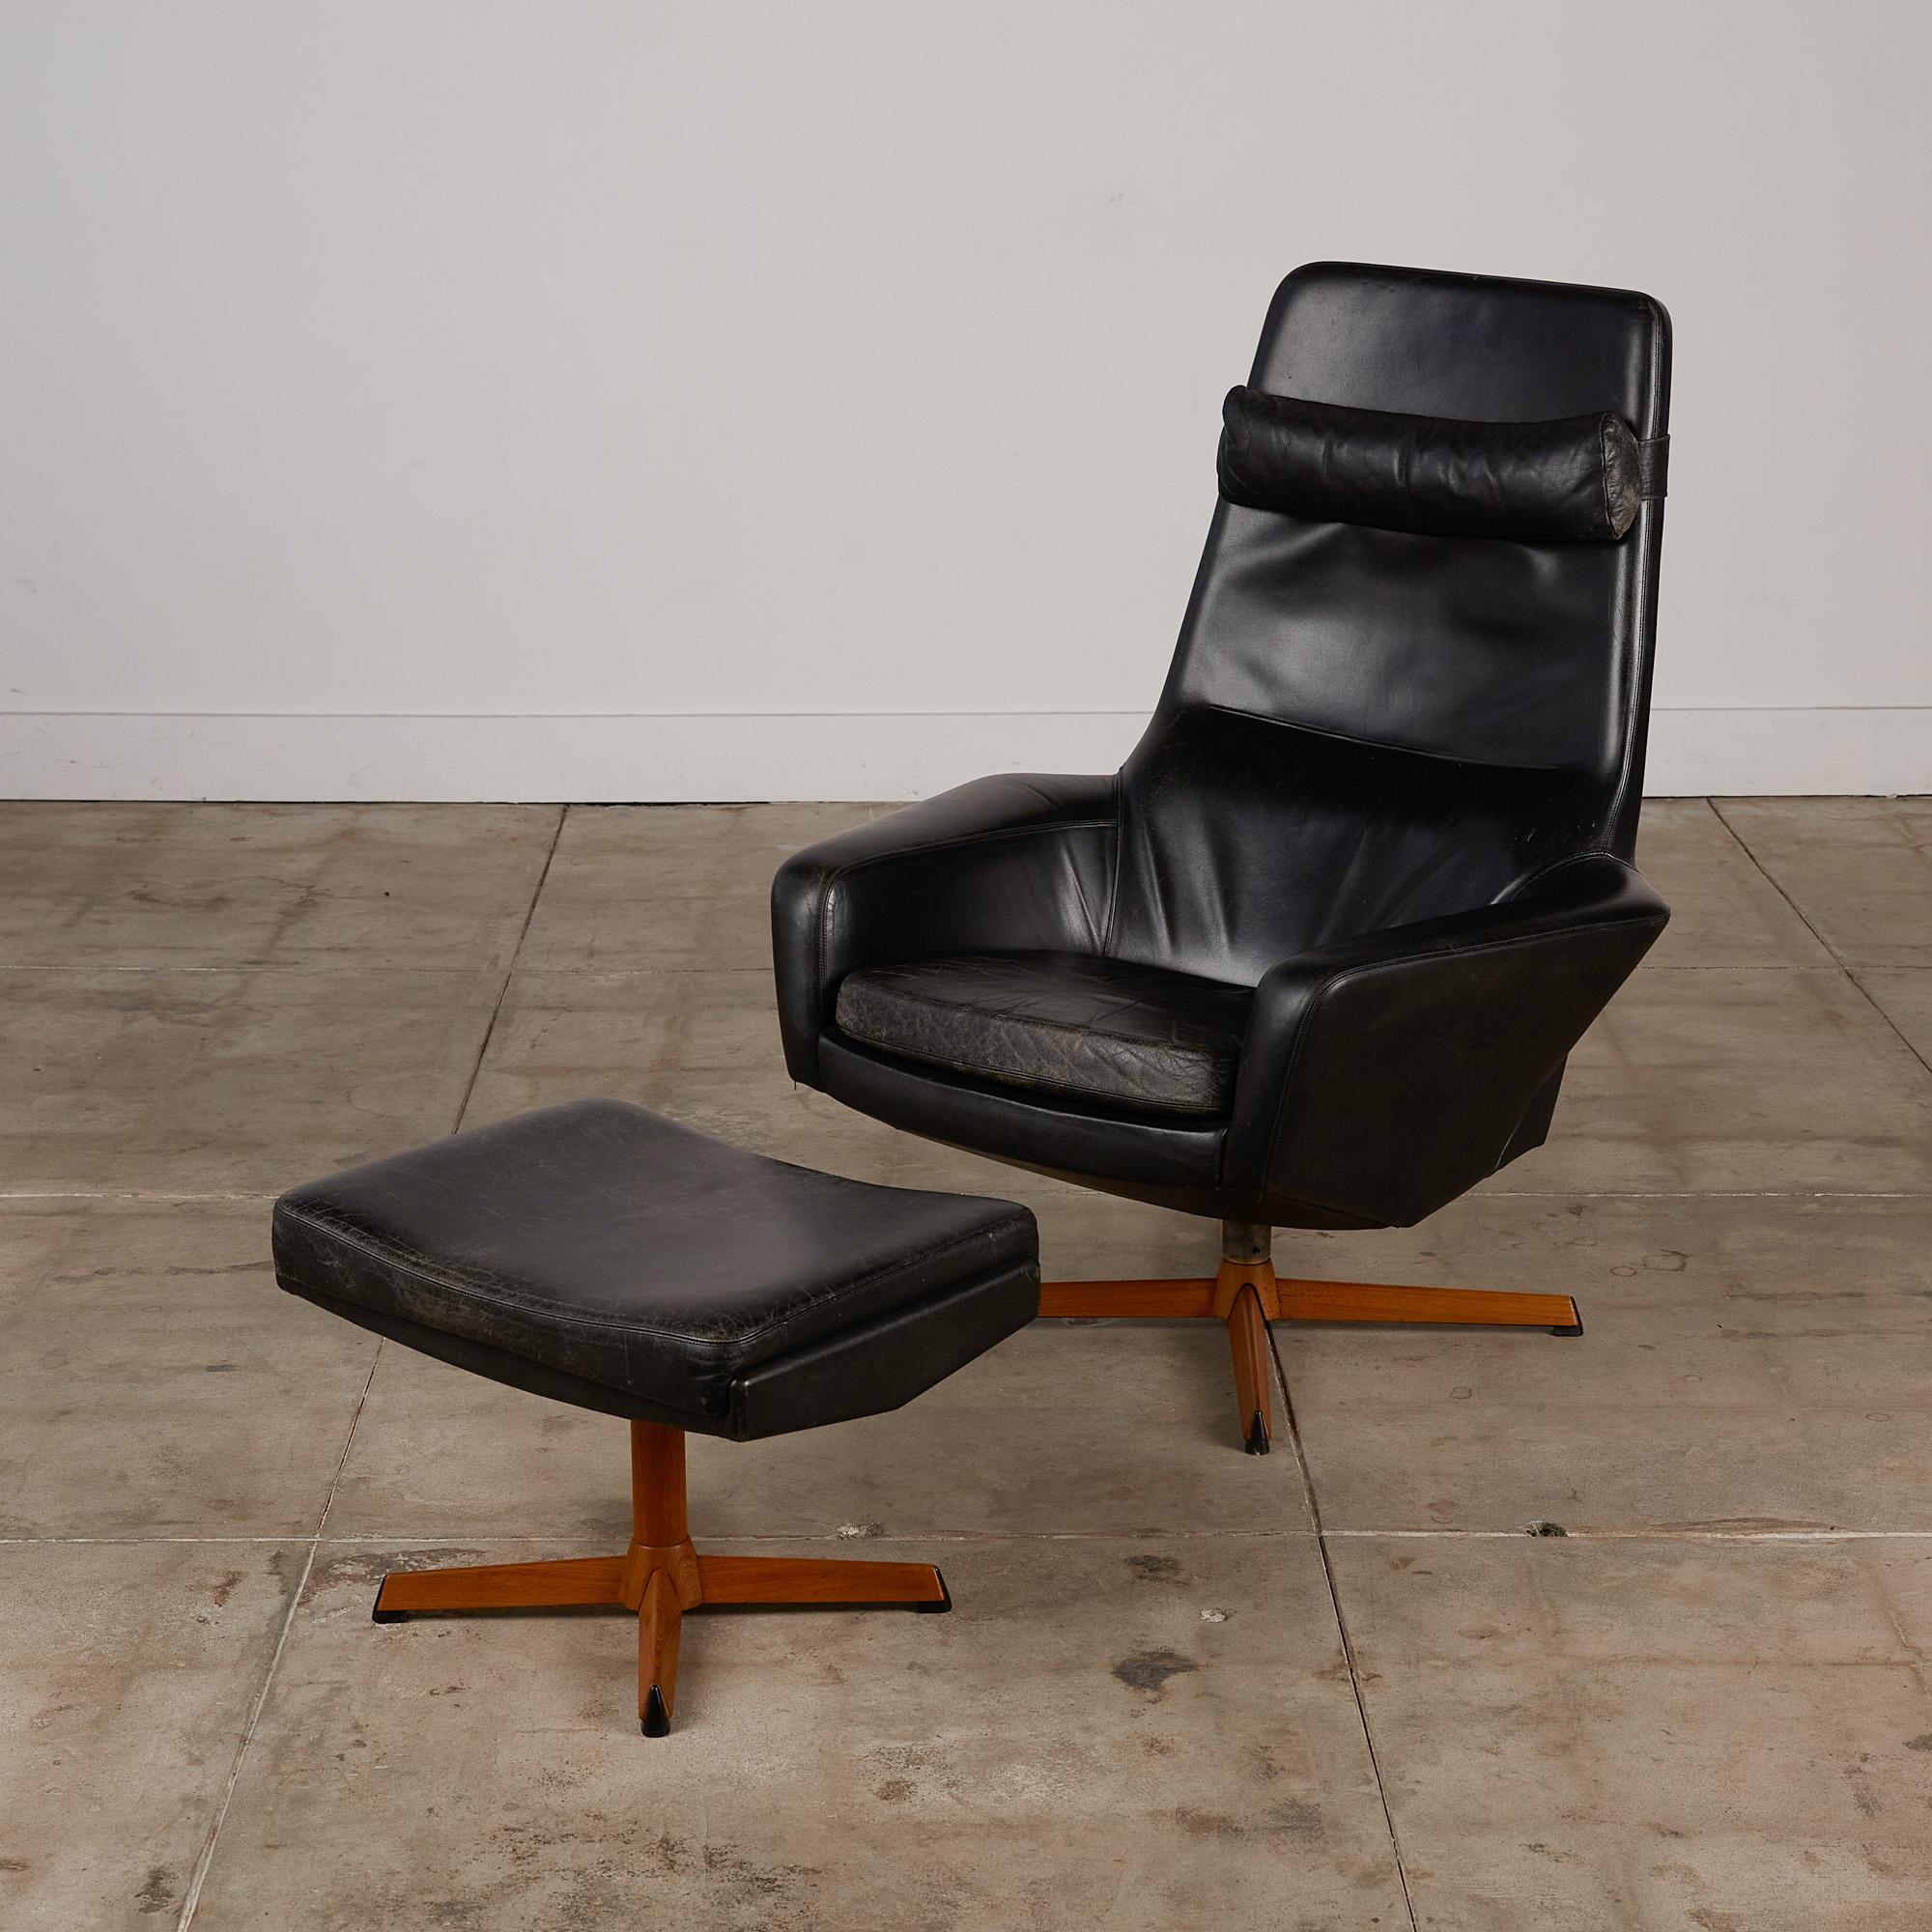 Lounge chair with ottoman by Ib Madsen for Madsen & Schübell, Denmark, circa 1950s. The chair and ottoman retain original black leather upholstery and feature multiple settings for comfortable angle adjustments. There is a detachable neck pillow